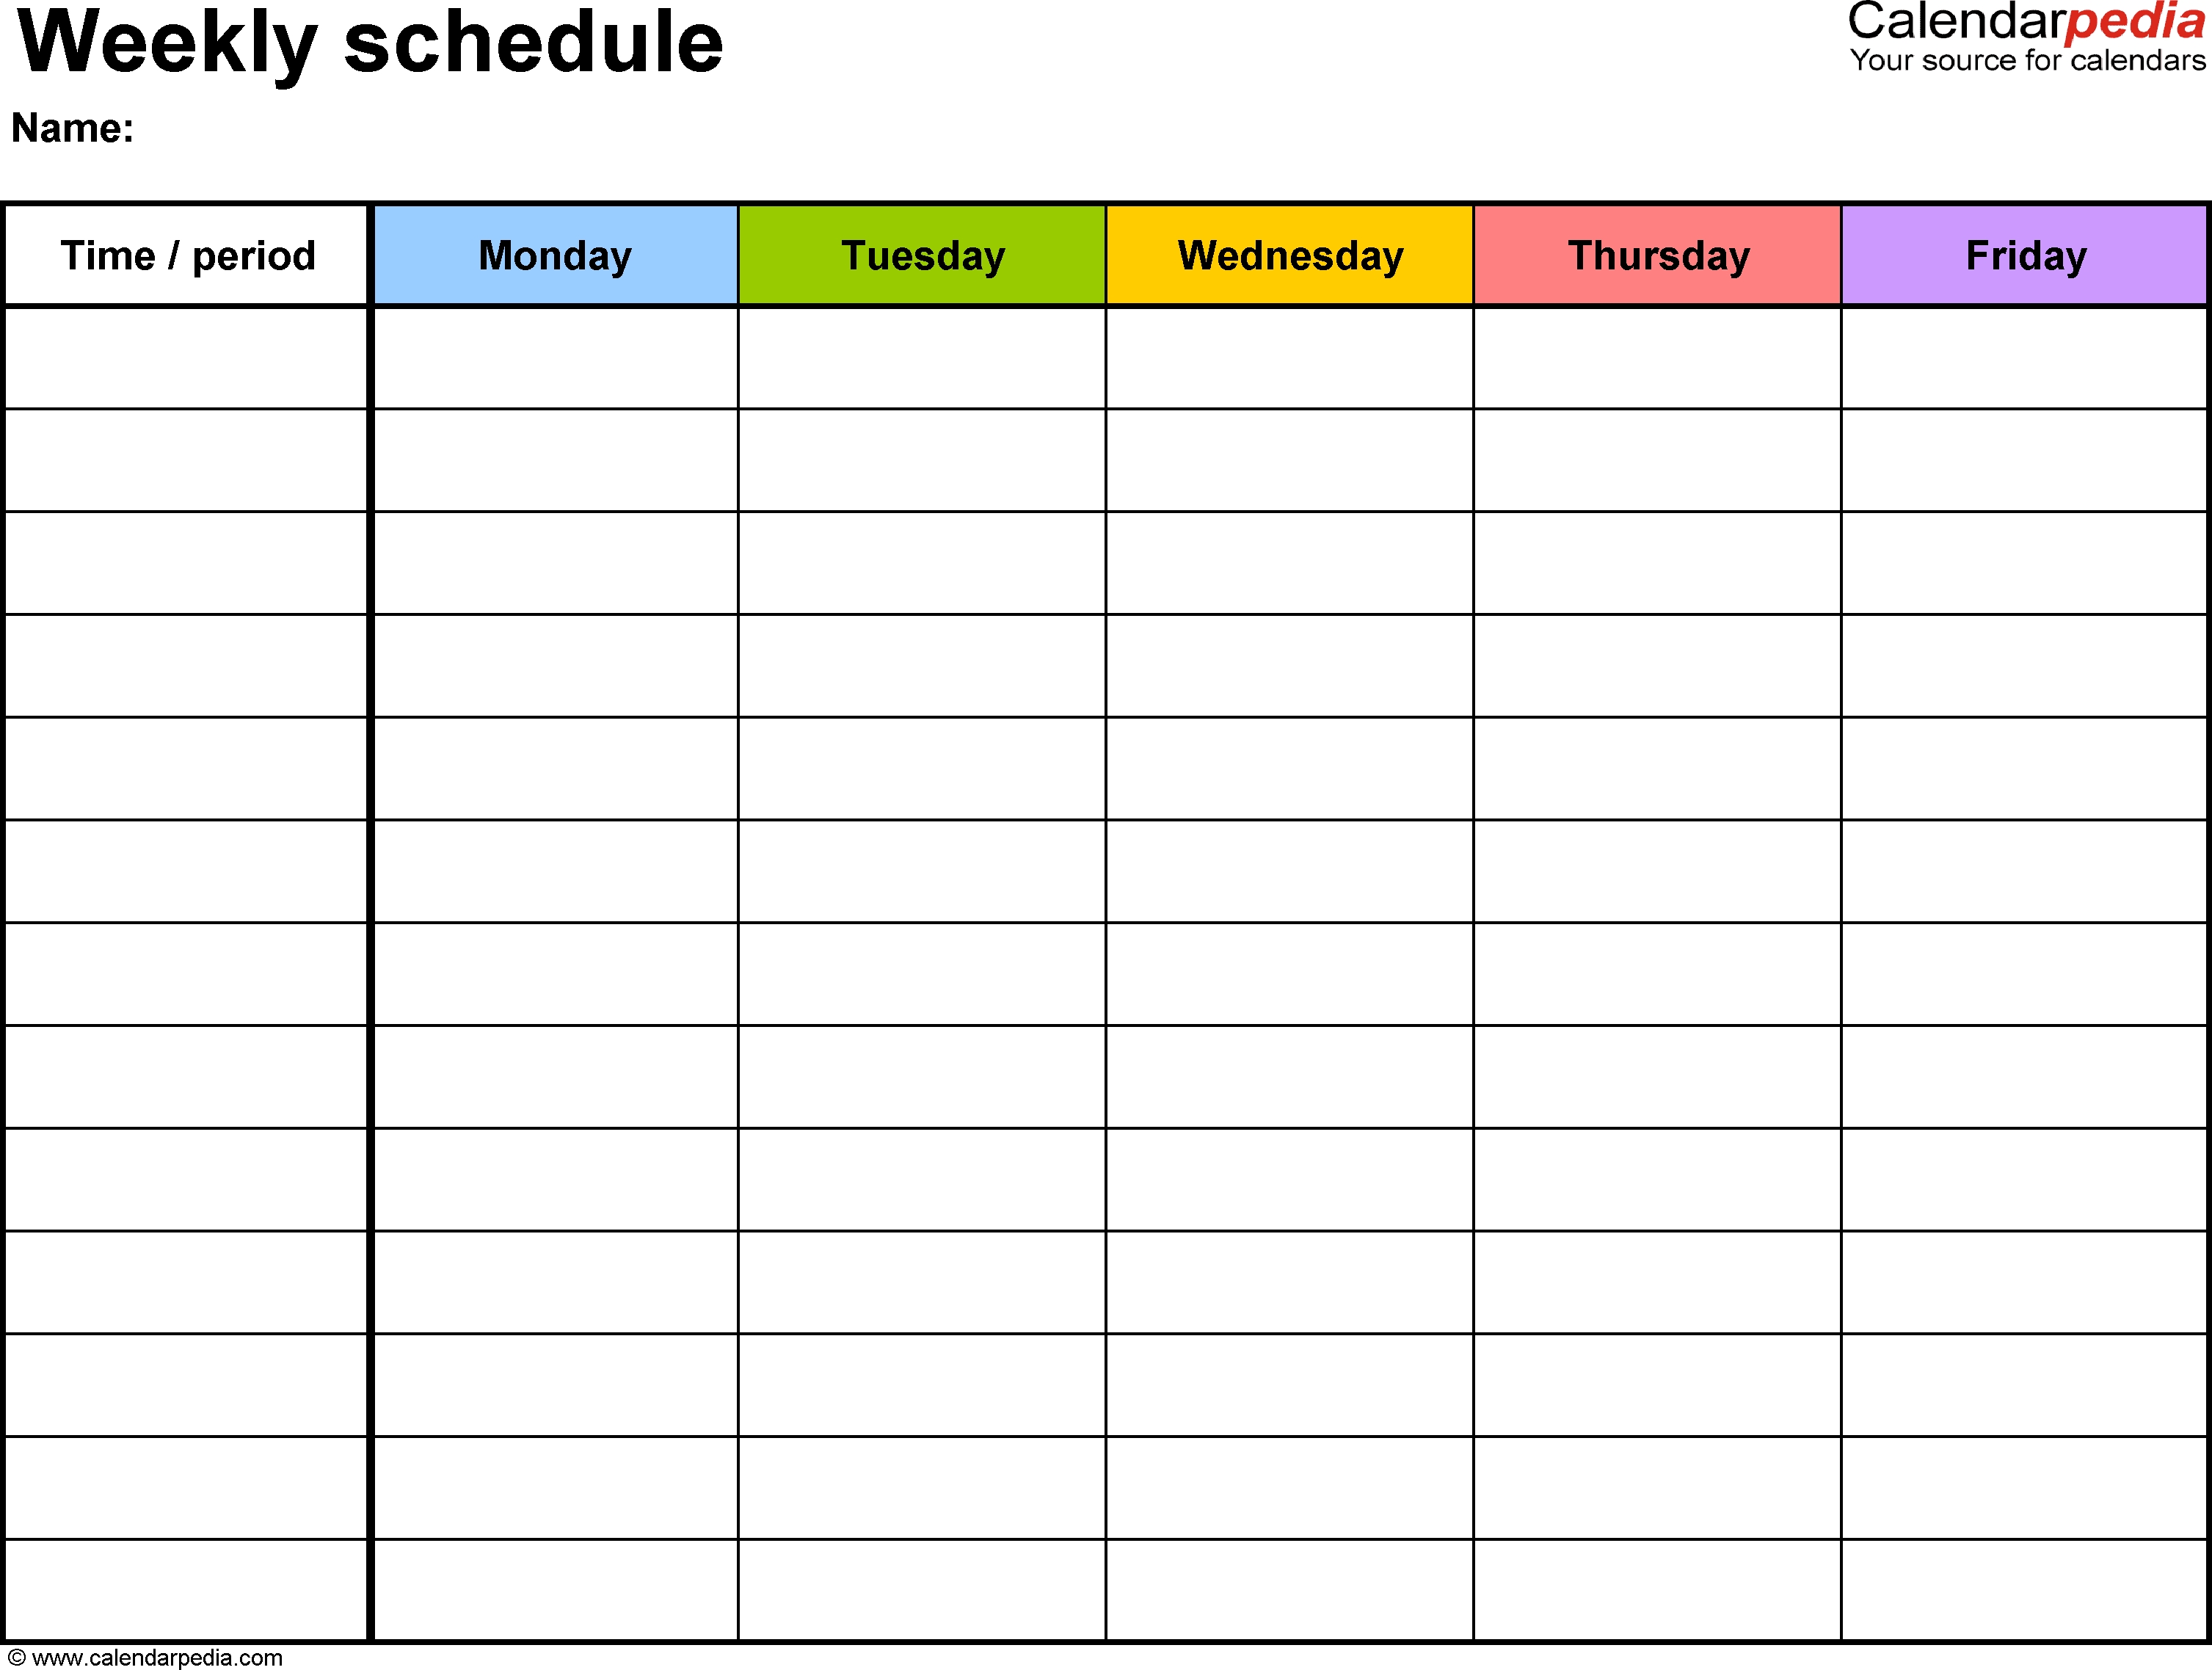 Free Weekly Schedule Templates For Word - 18 Templates regarding Monday - Sunday Calendar Template